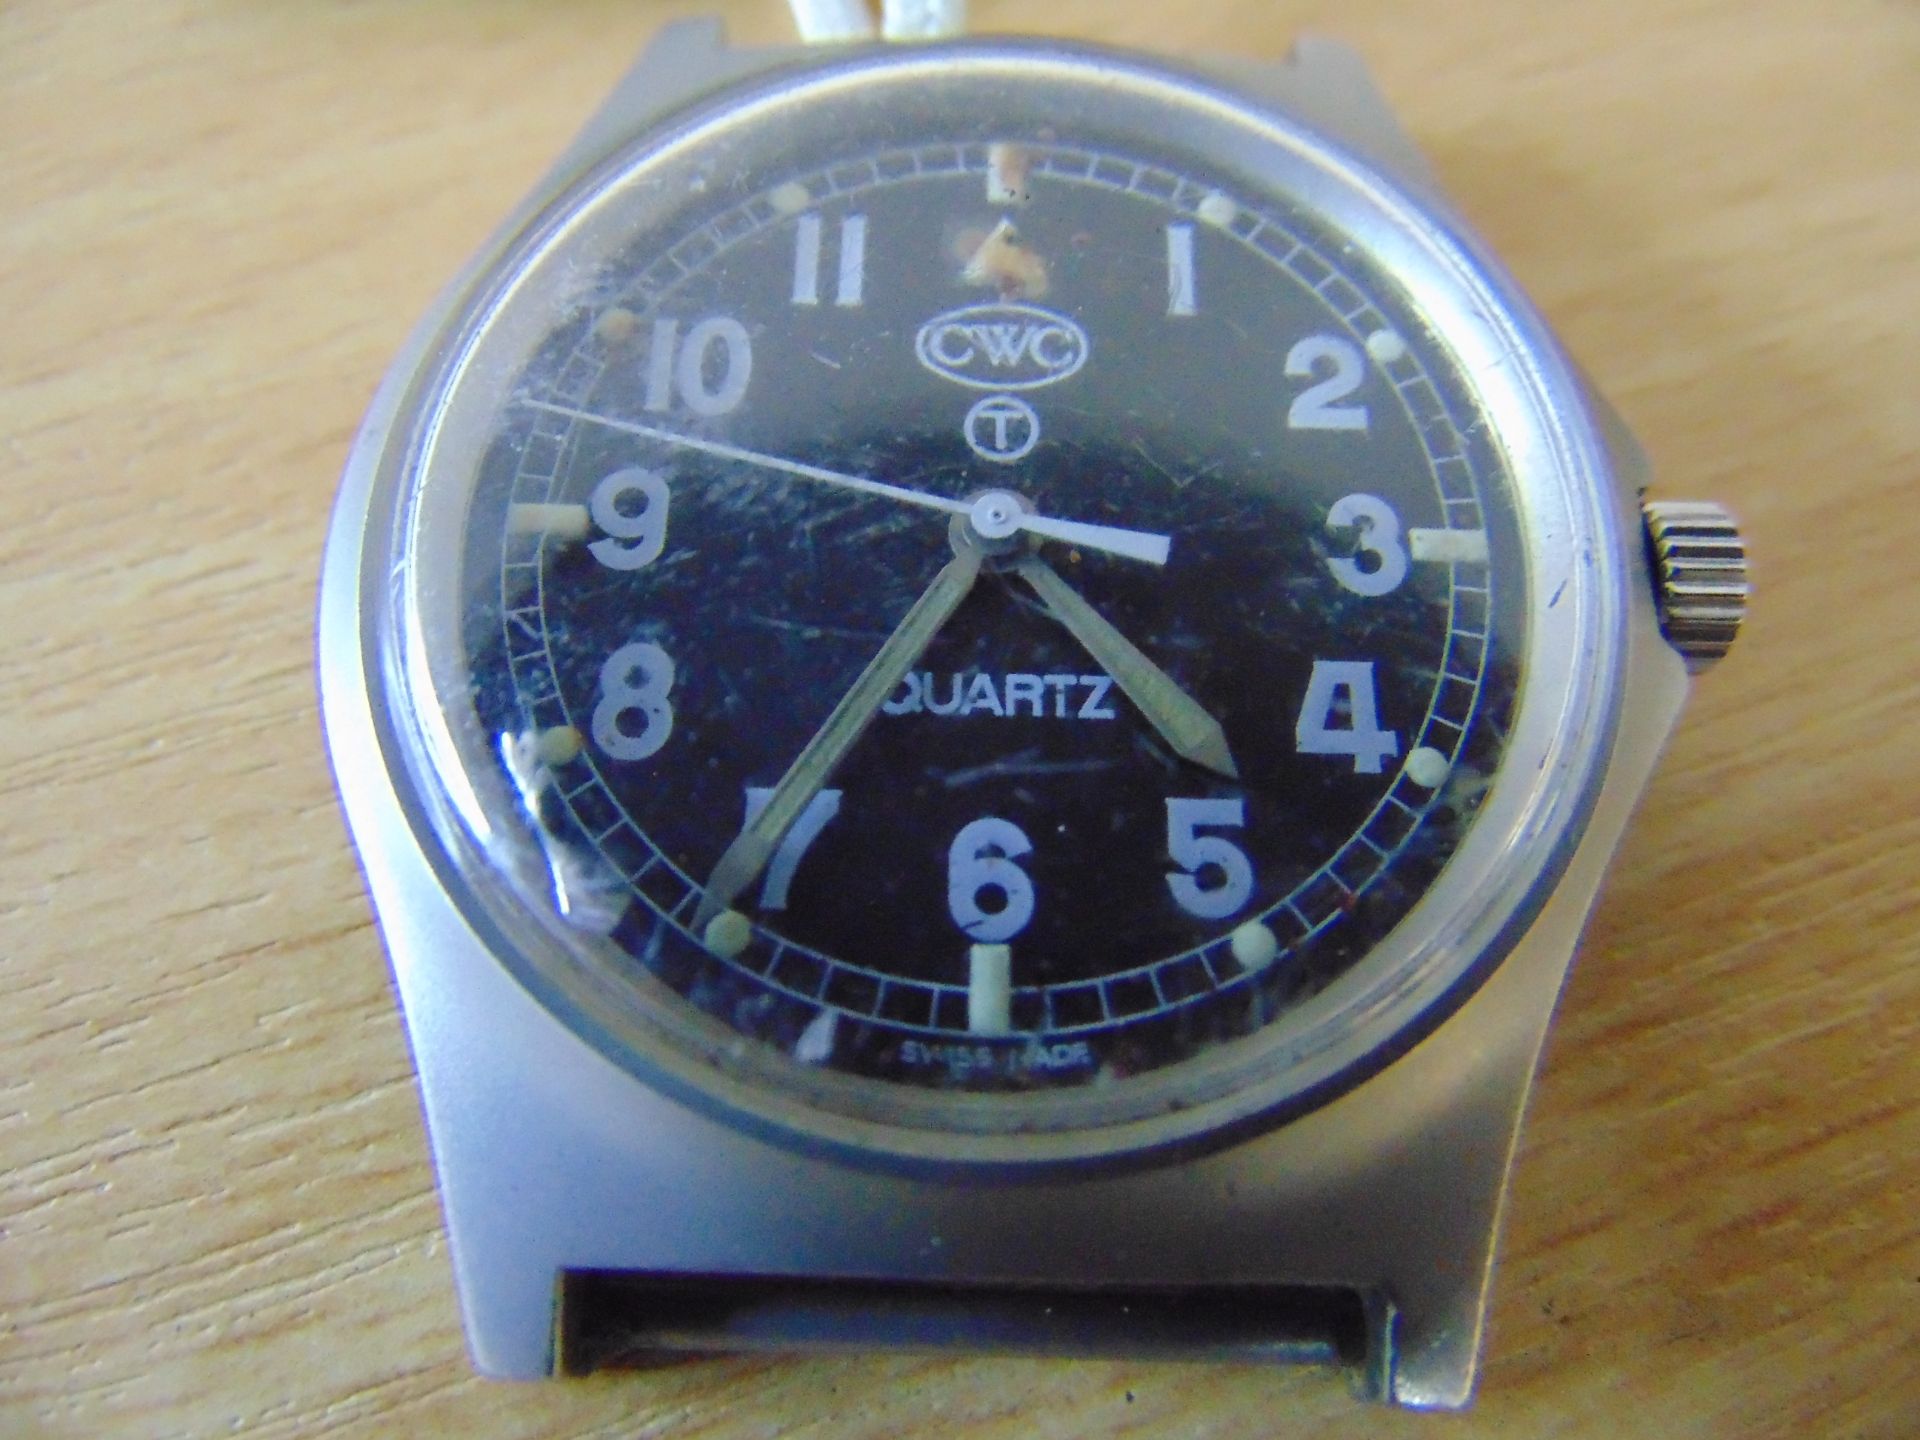 CWC 0552 ROYAL MARINES/ NAVY ISSUE SERVICE WATCH NATO MARKS DATE 1990 GULF WAR I - Image 5 of 6